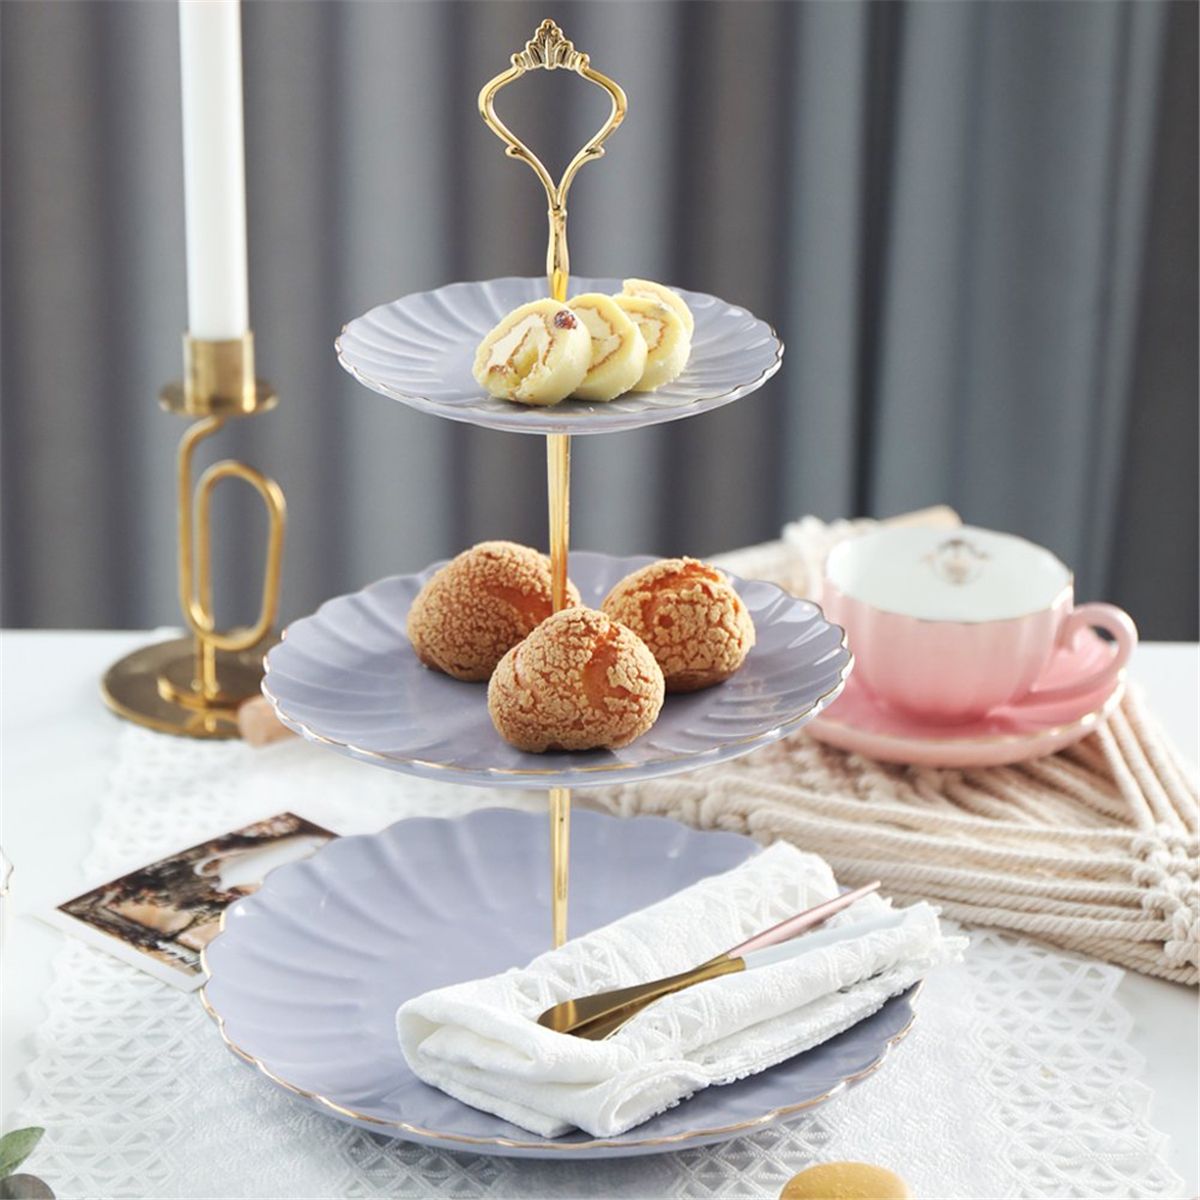 Tier-Cake-Cupcake-Plate-Gold-Stand-Rack-Fittings-Handle-Rod-Wedding-Party-Decor-Supplies-1493857